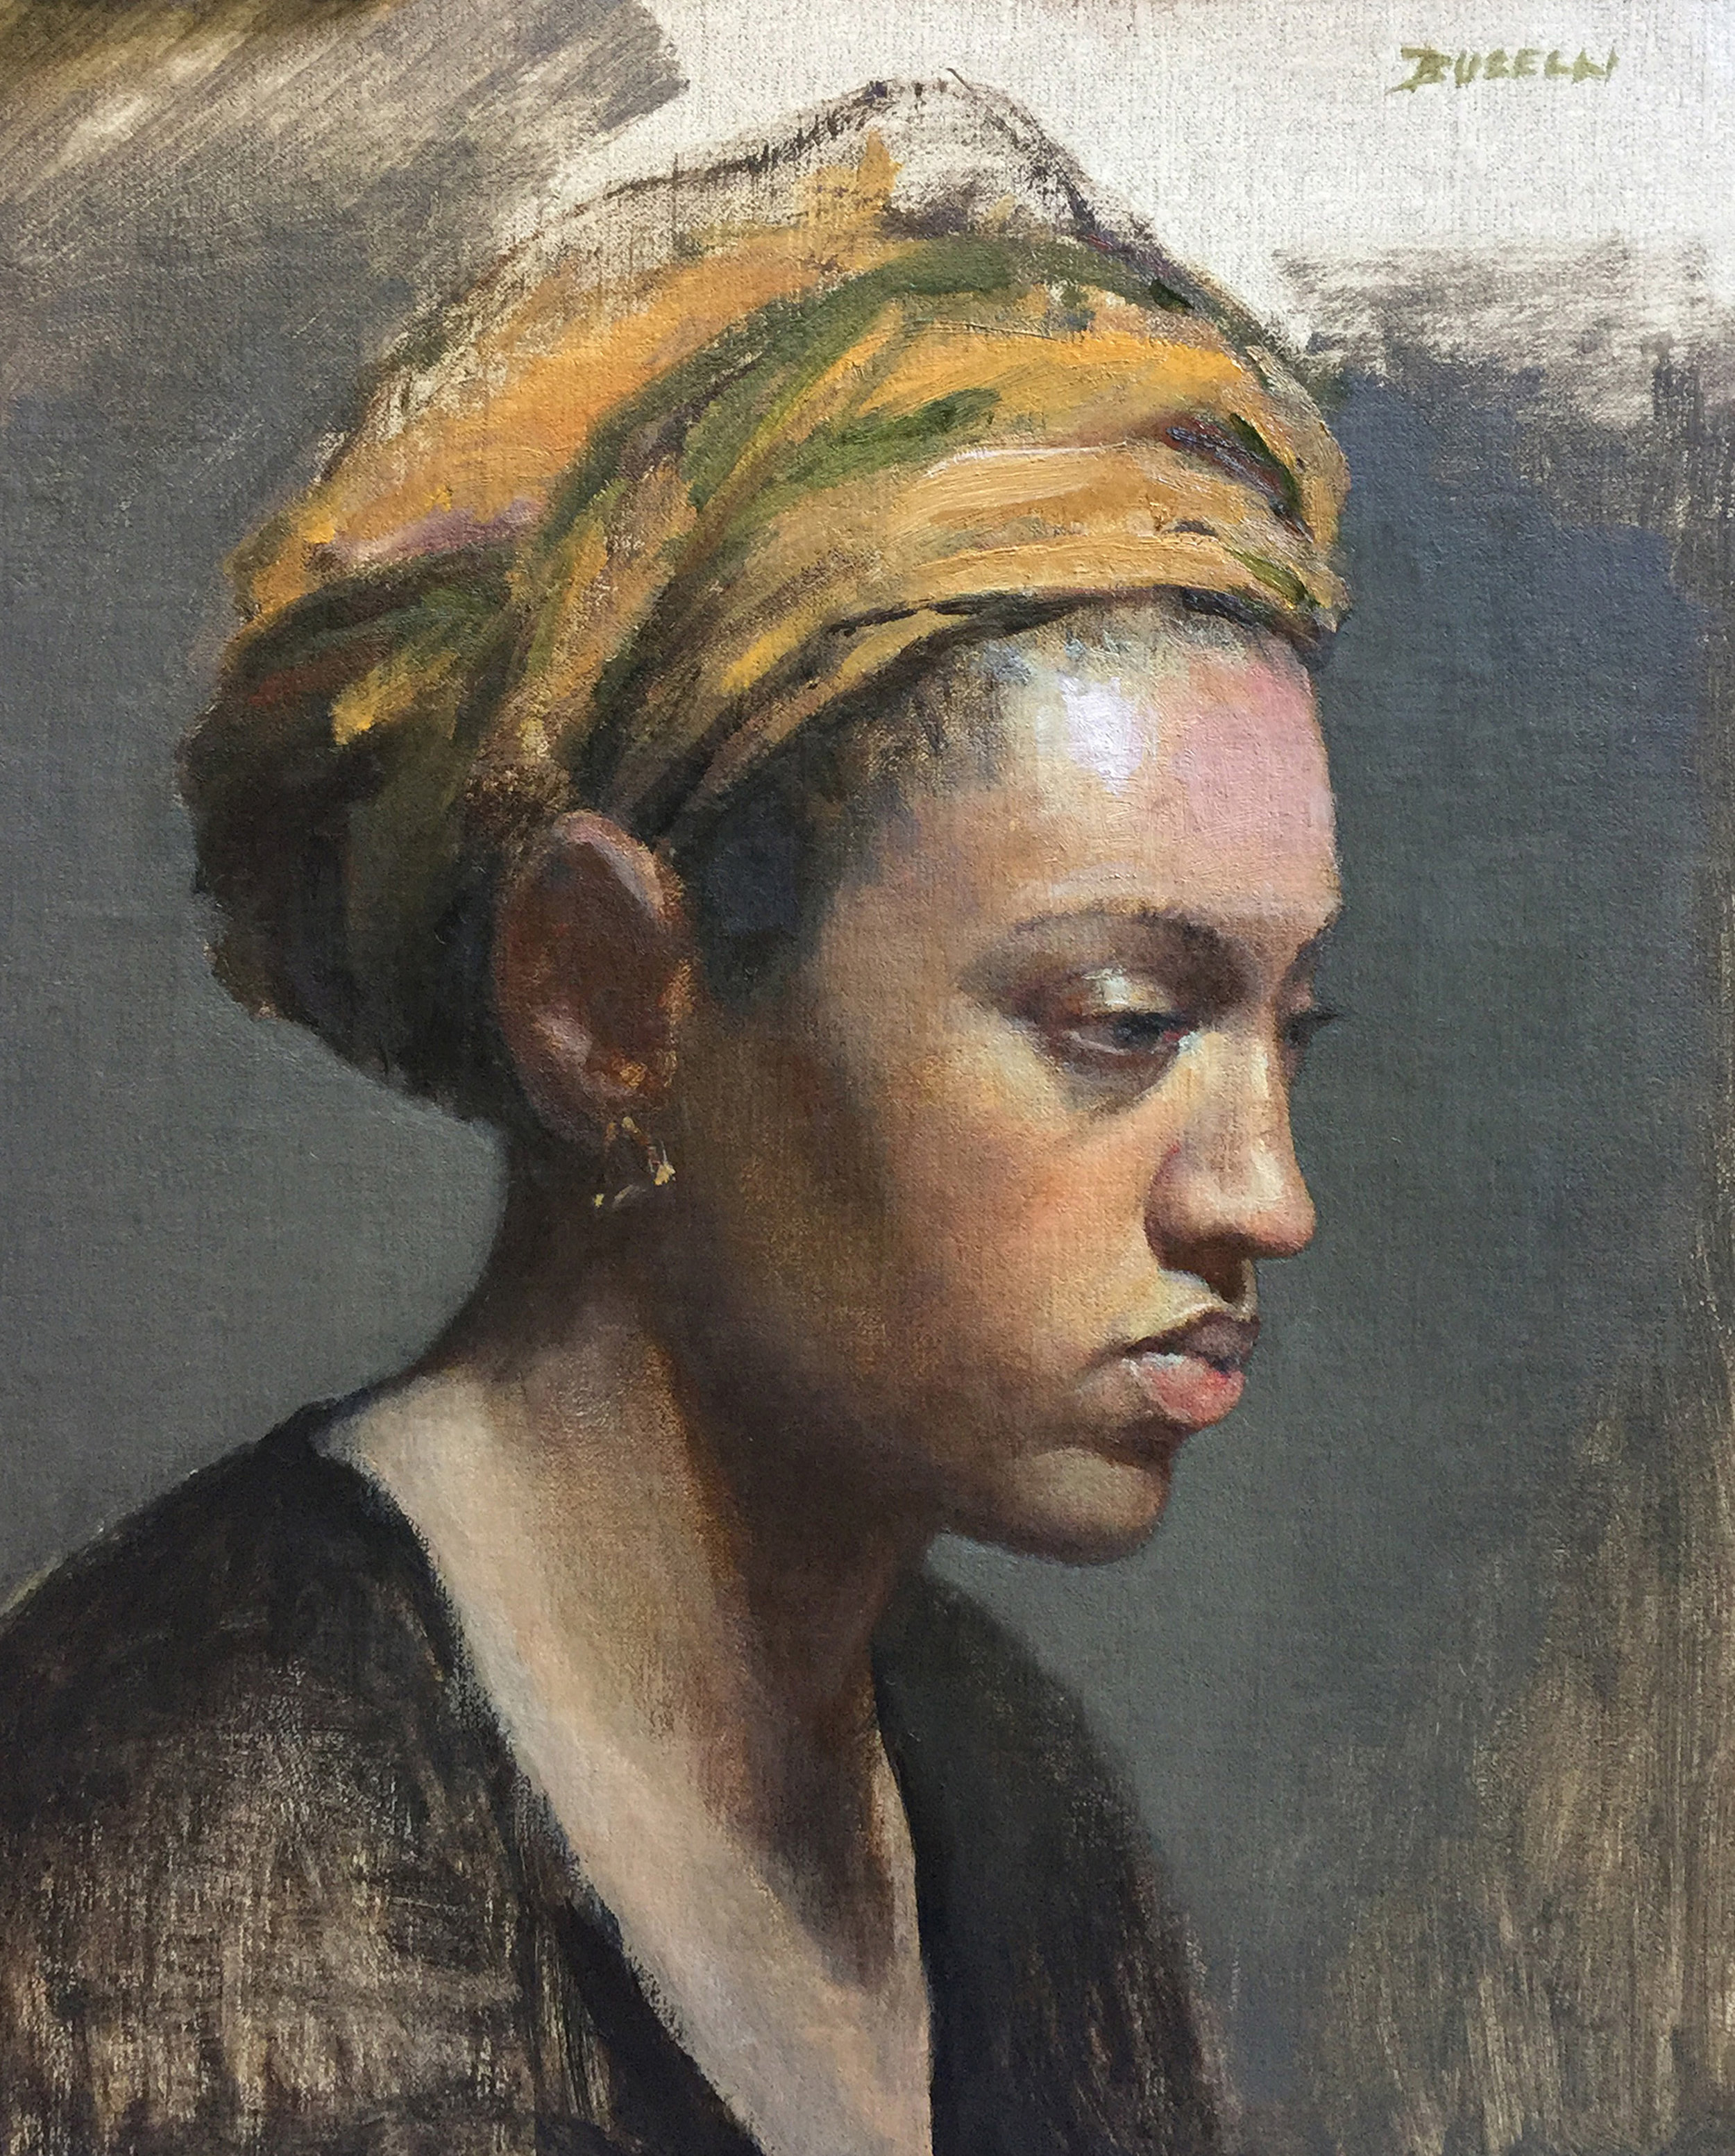  WOMAN IN TURBAN  oil on linen | 12” x 10”  AWA Grand Prize - Customs House Museum  